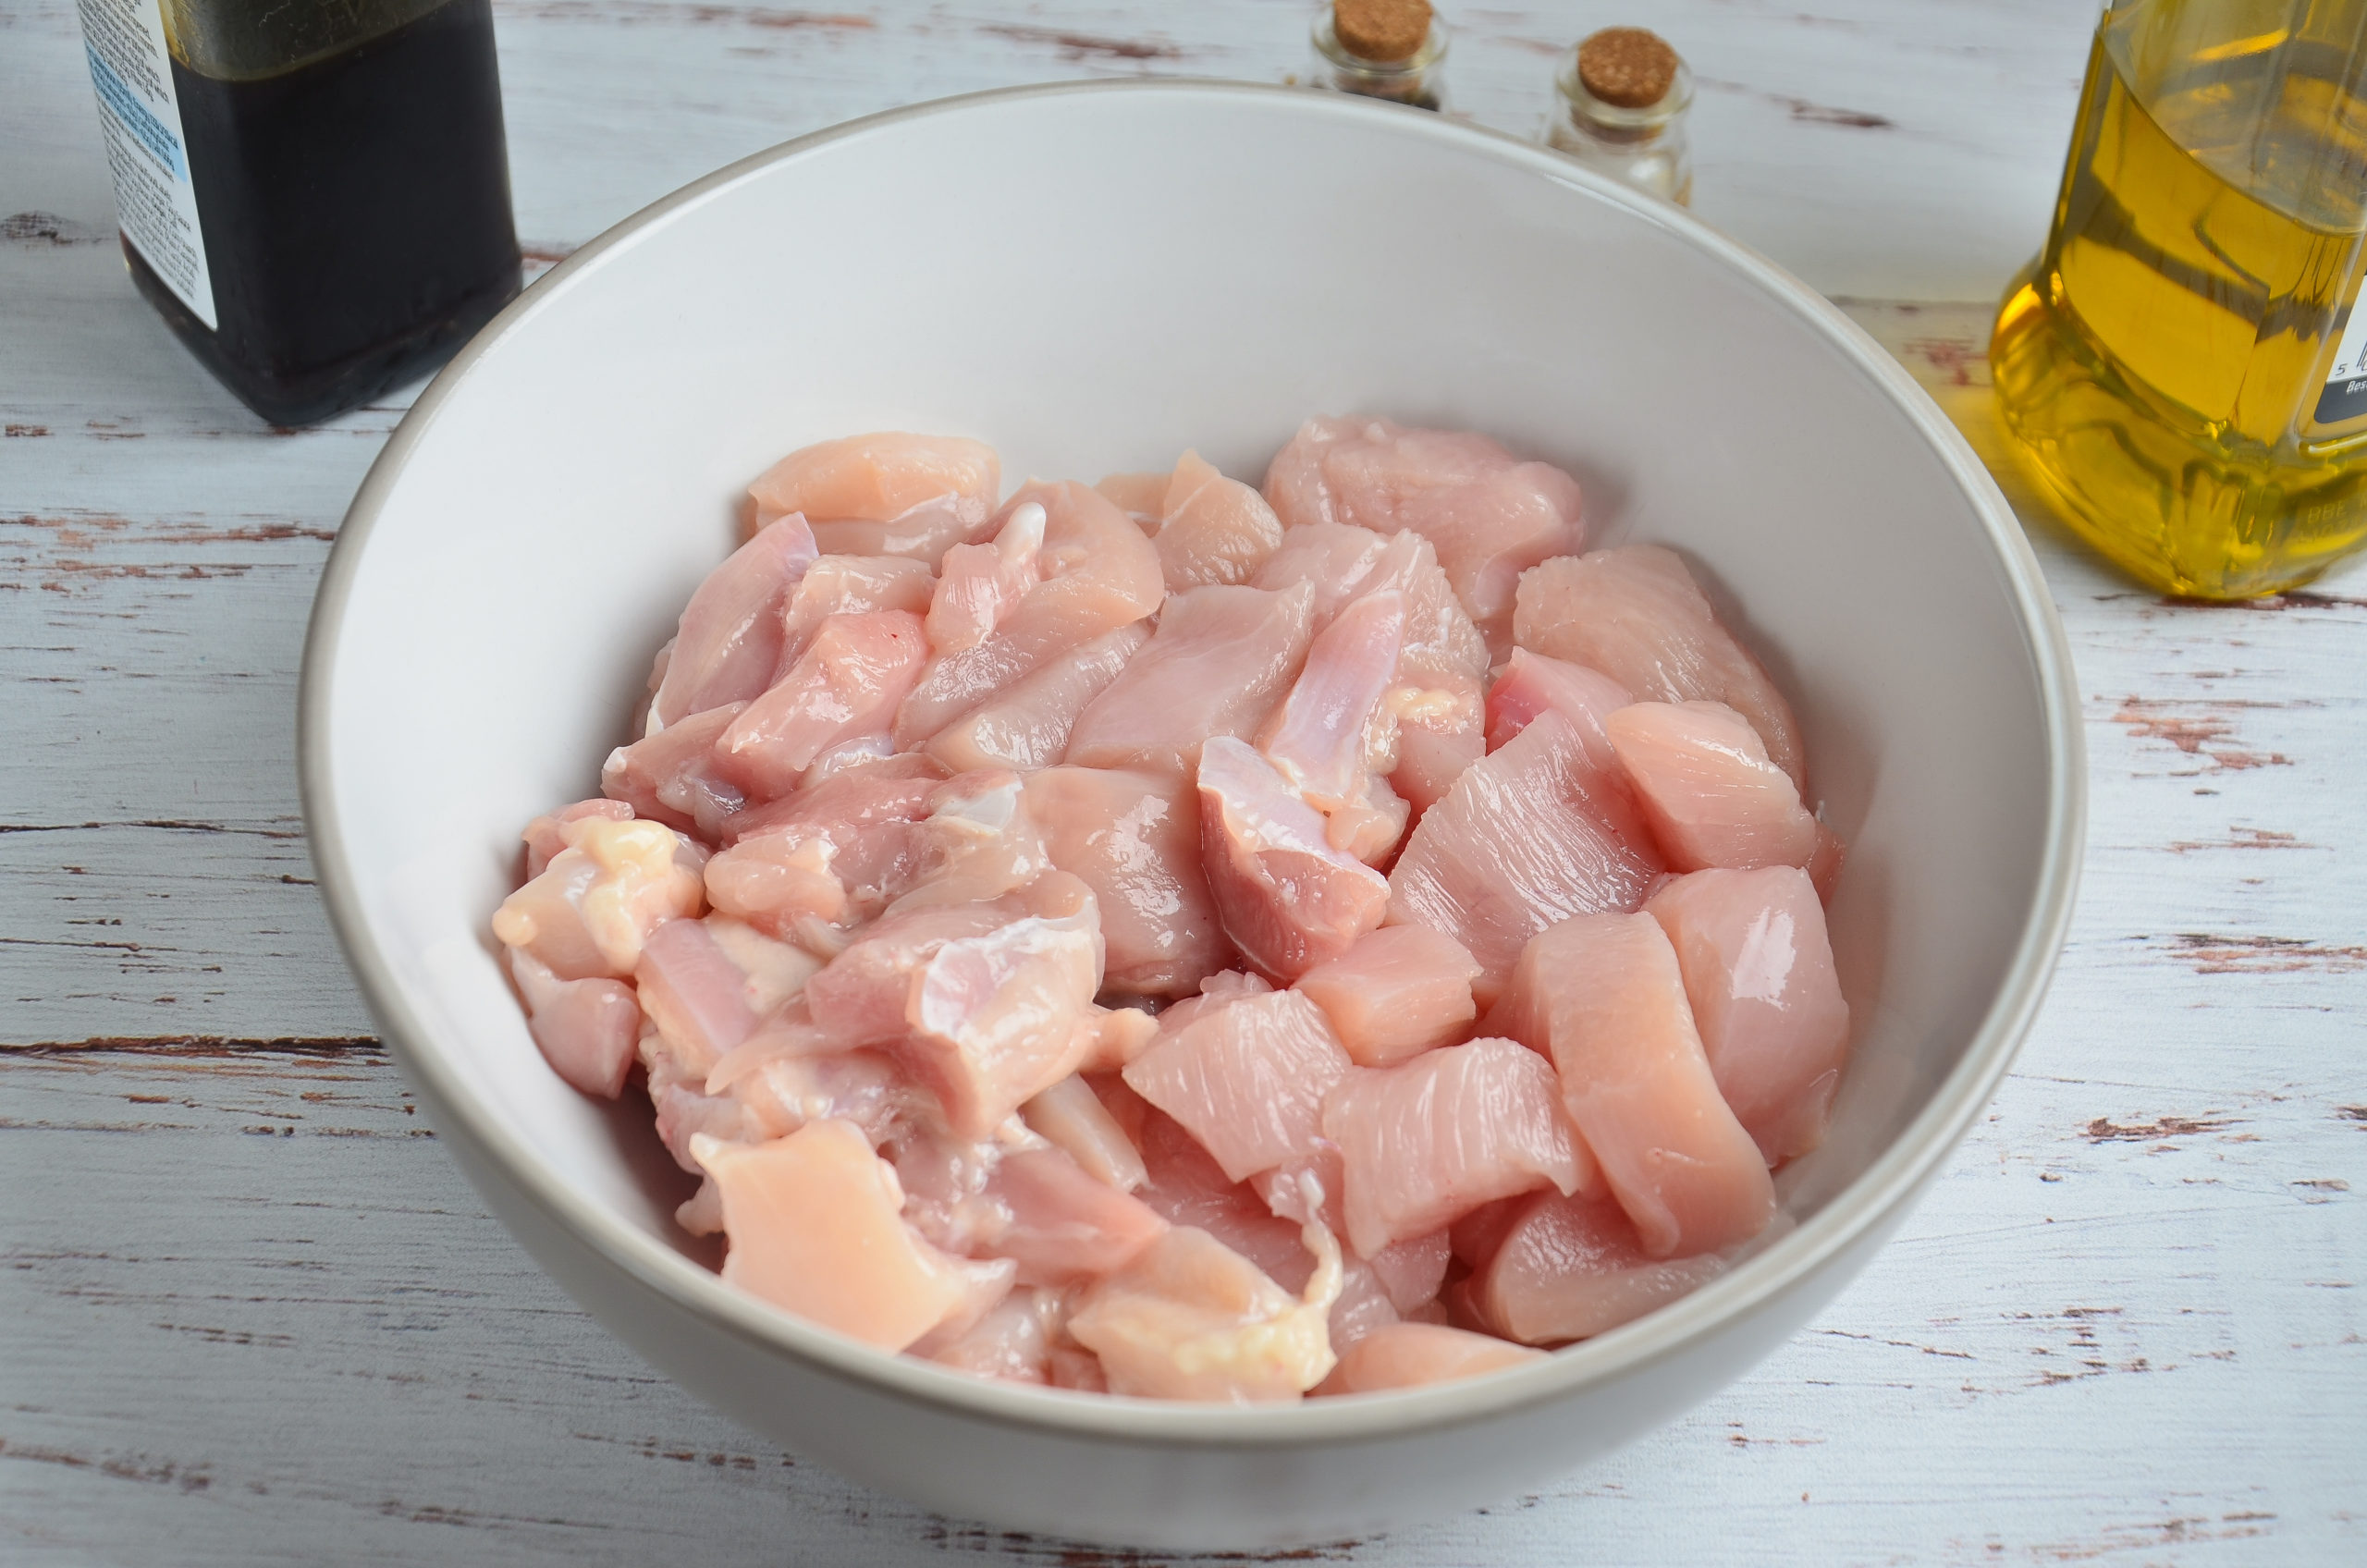 Diced chicken breast and thigh